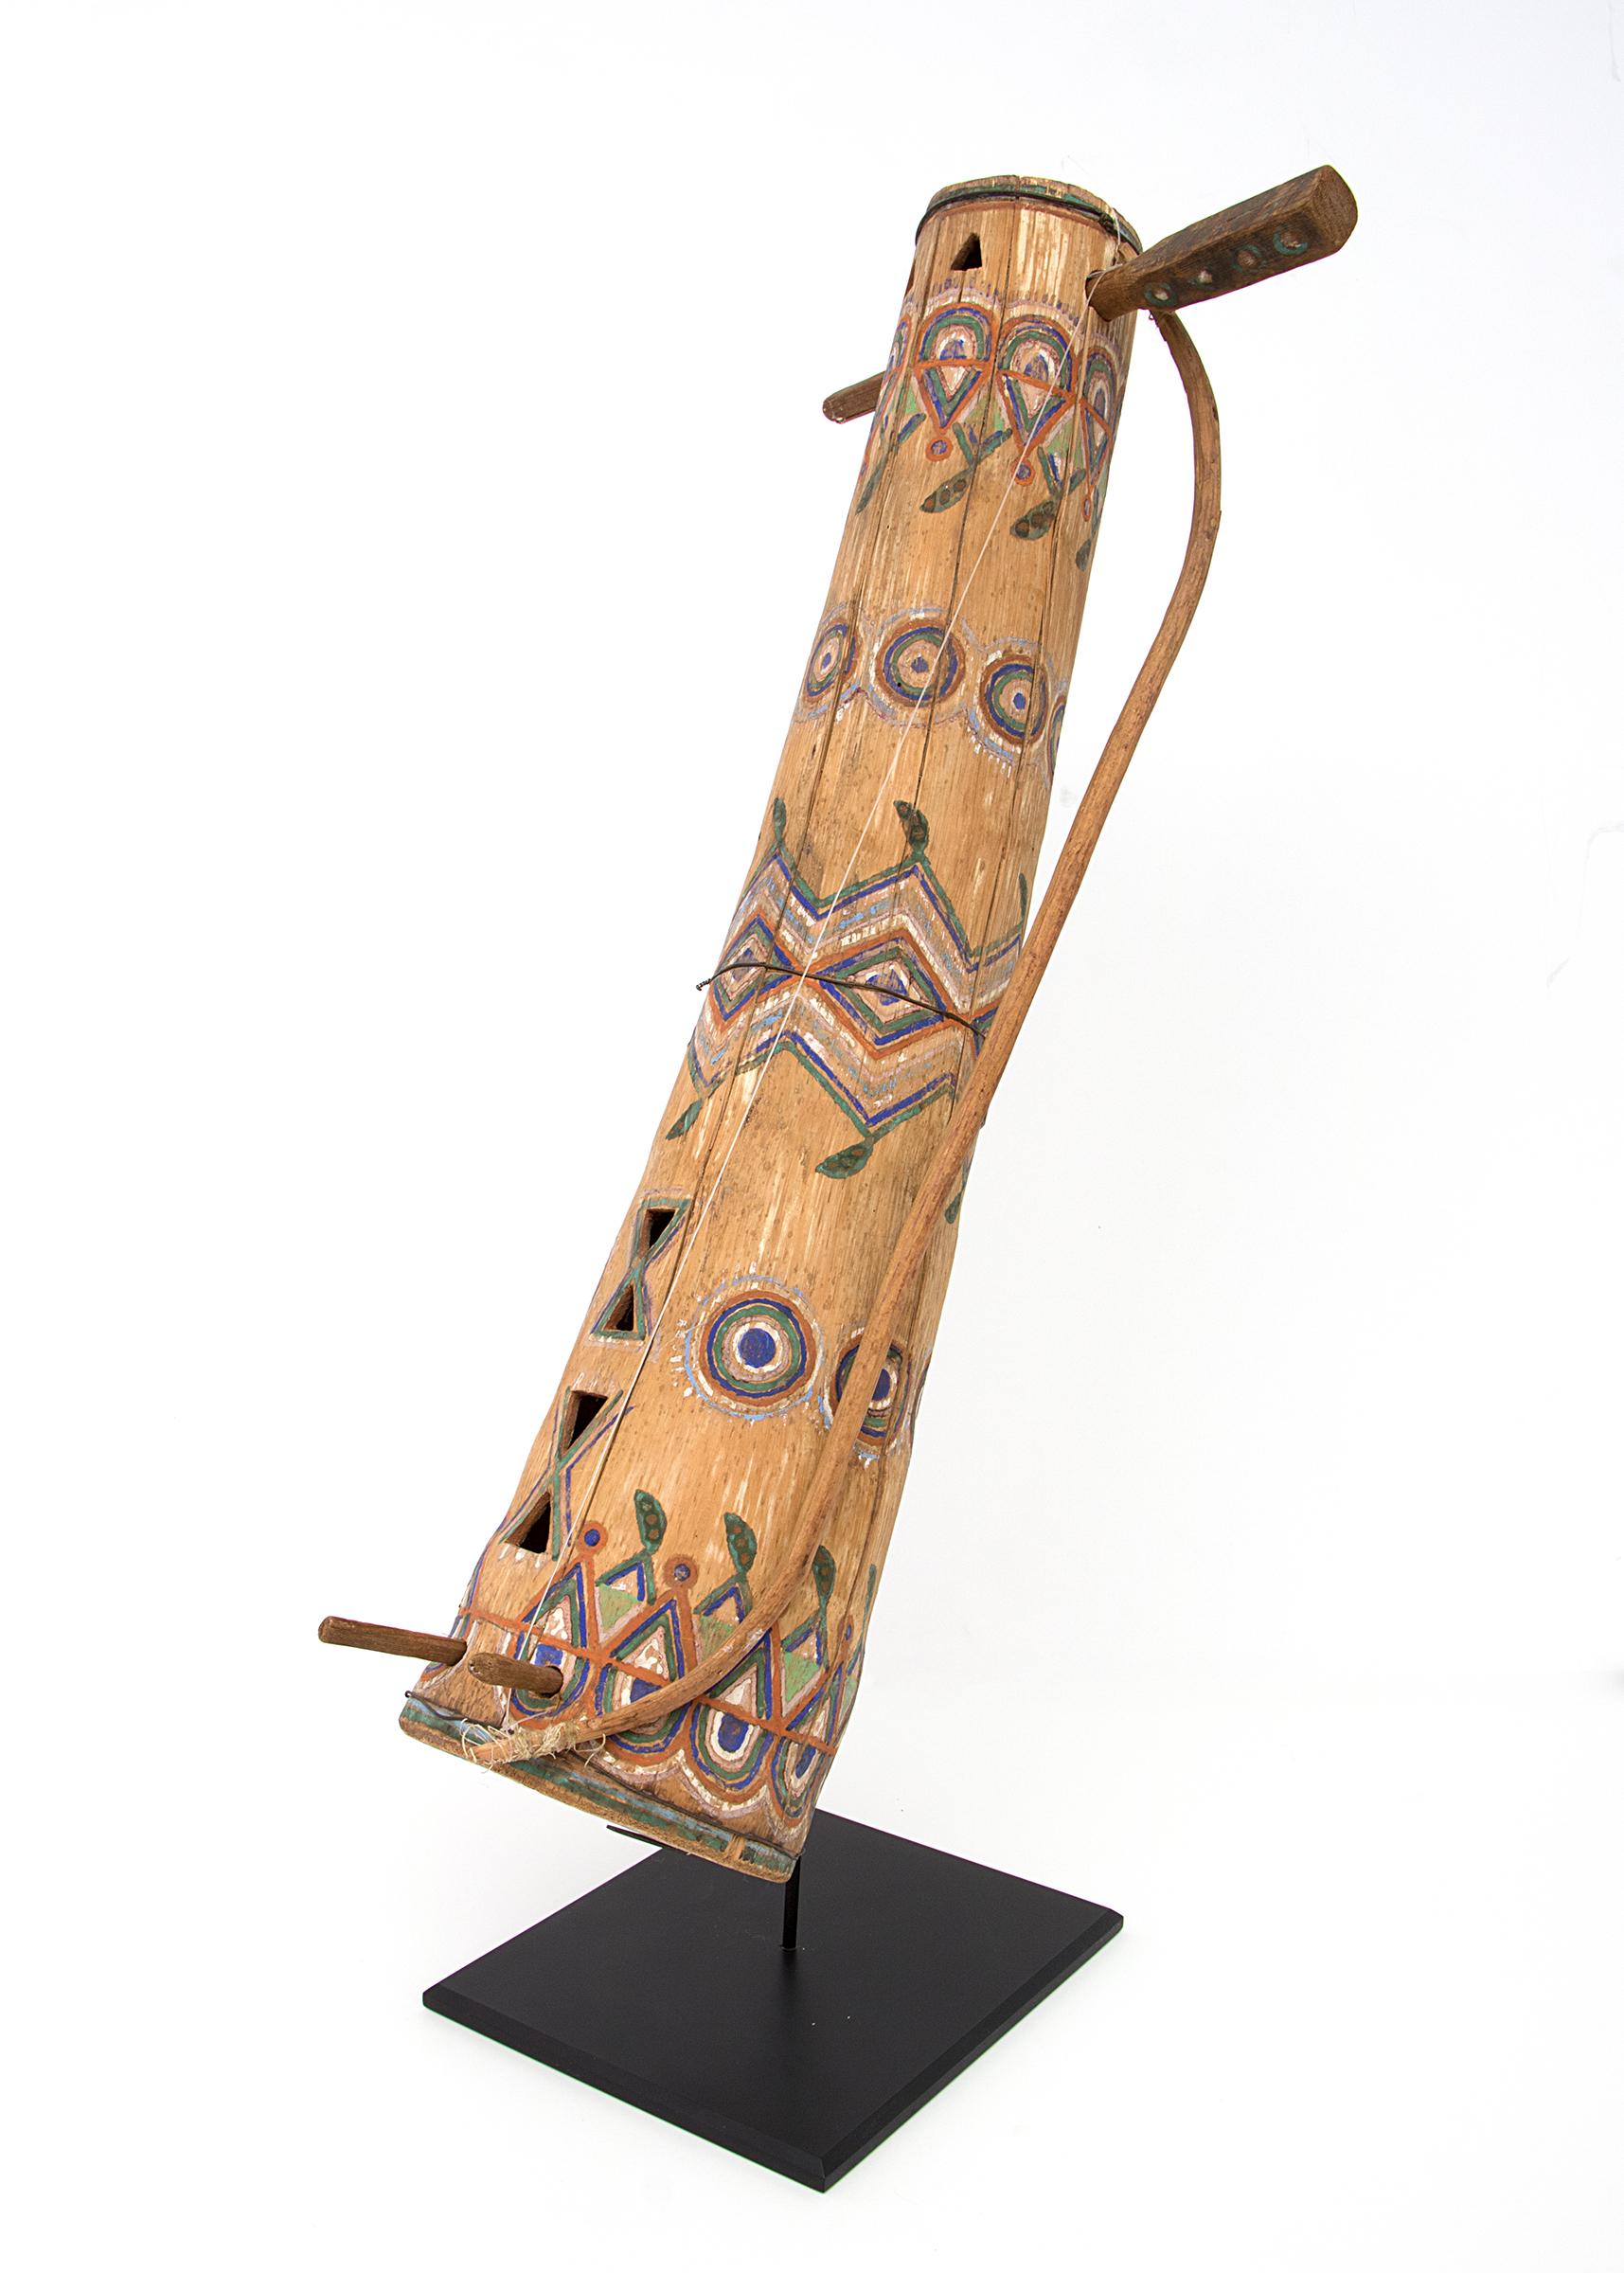 Custom Display Stand is included.

This piece was created by the renowned Apache artist, Amos Gustina (1858-1945) commonly called an 